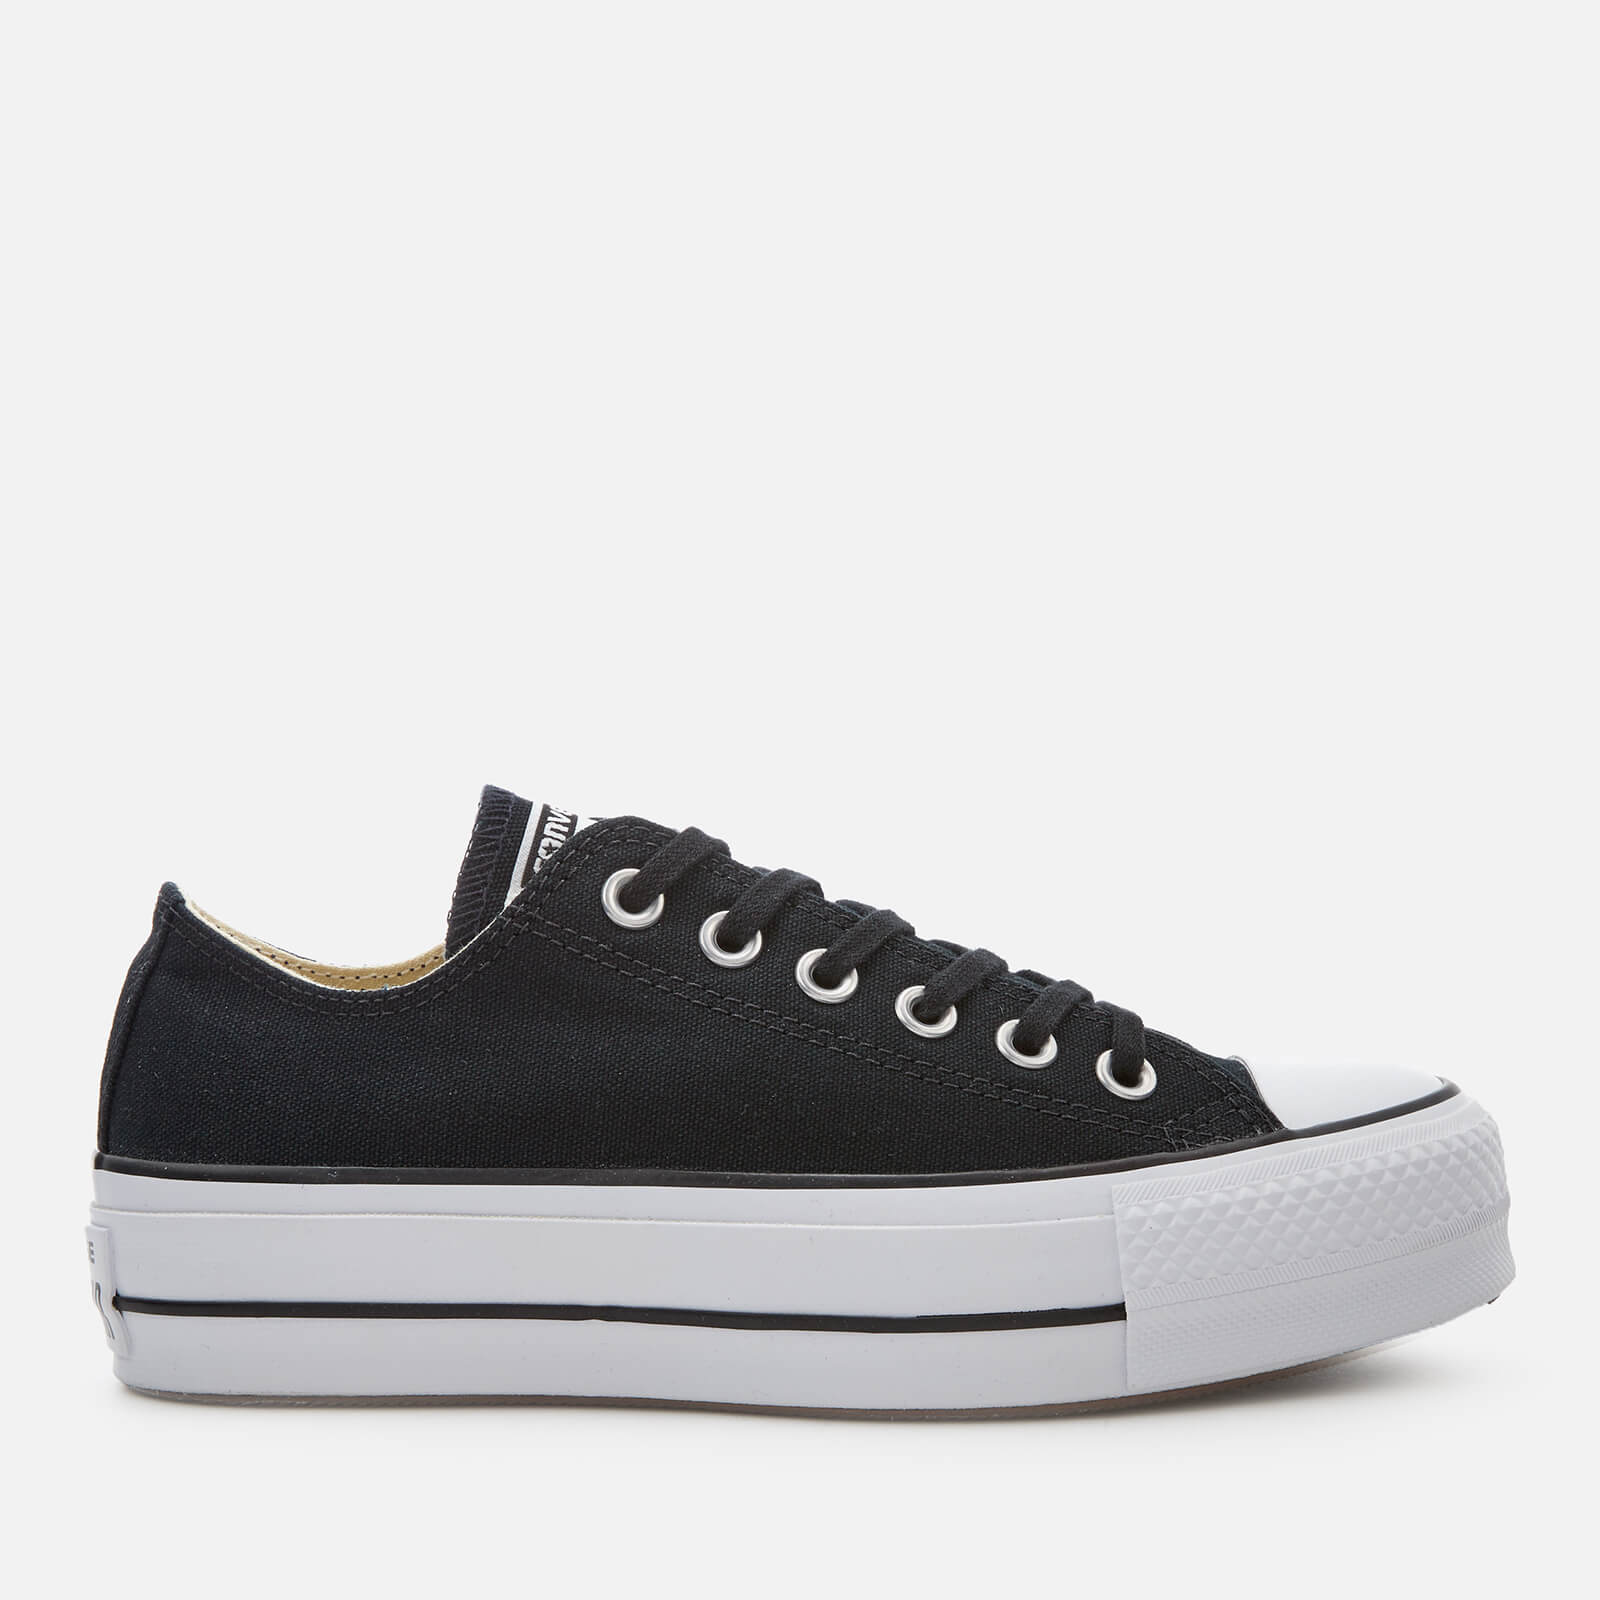 Converse Women's Chuck Taylor All Star Lift Ox Trainers - Black/White/White - UK 8